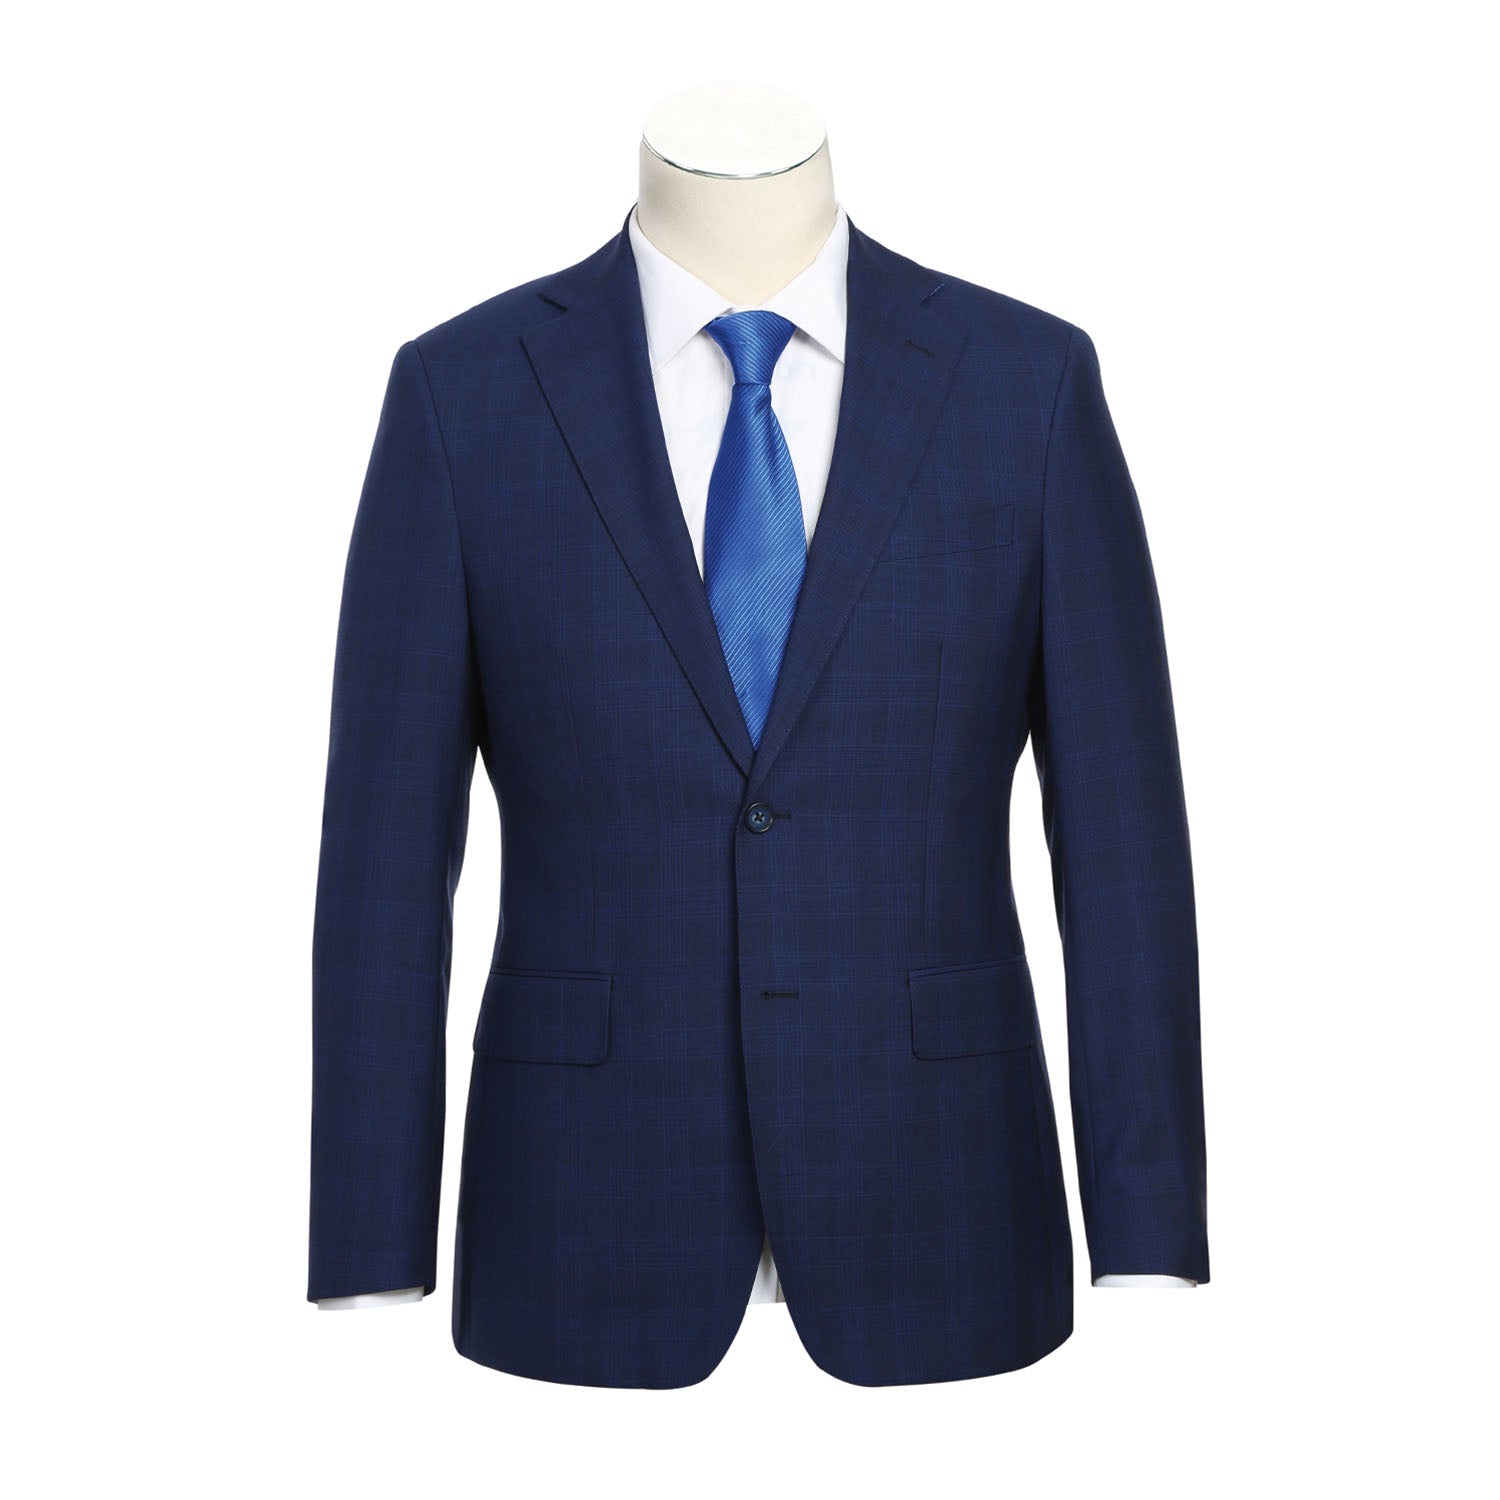 Wool Stretch Single Breasted SLIM FIT Suit in Midnight Blue Check (Short, Regular, and Long Available) by English Laundry